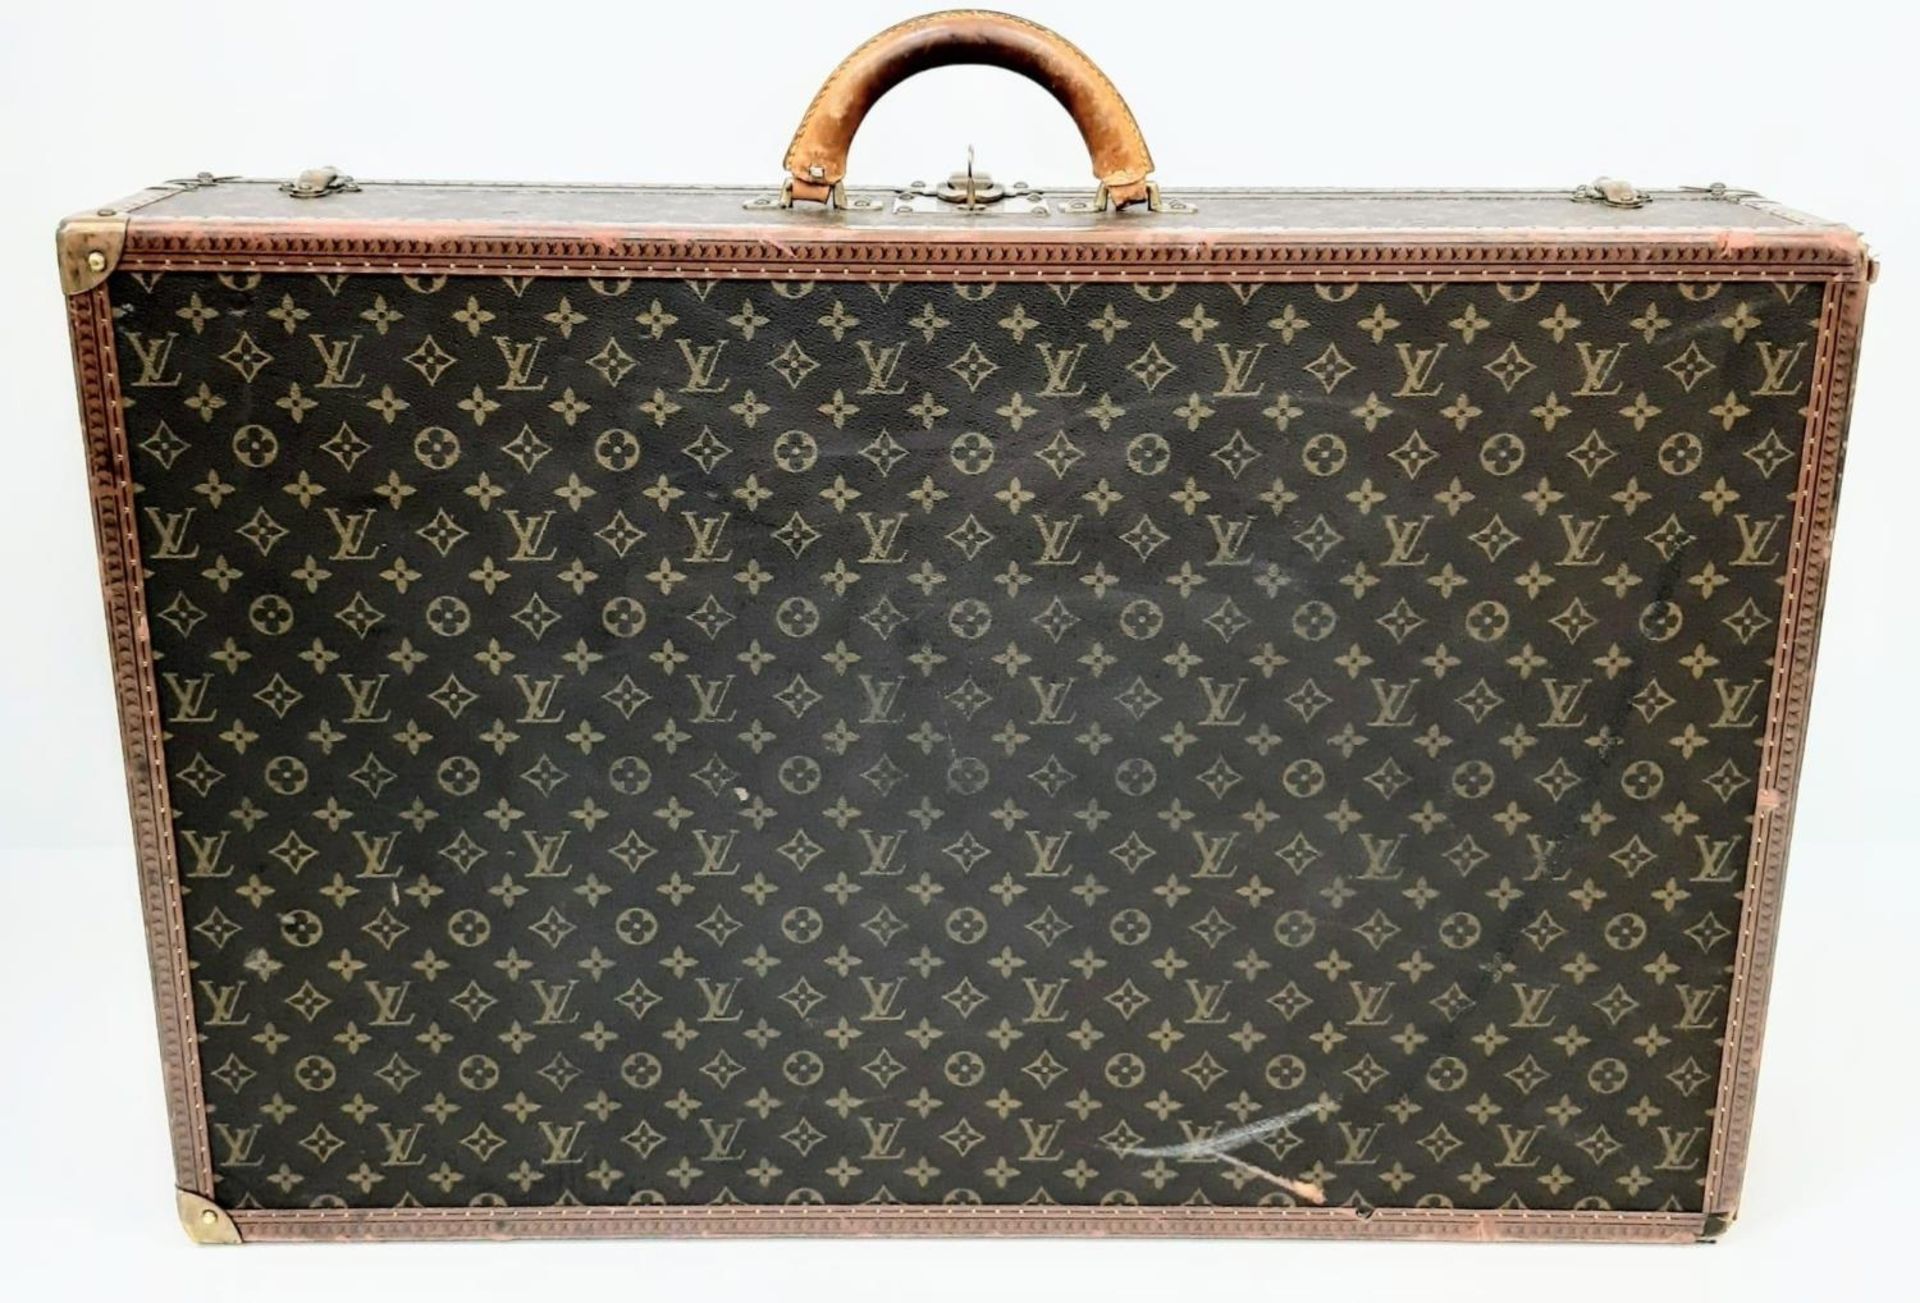 A Vintage Louis Vuitton Bisten 80 Trunk. Famous Monogram Leather With Gold Tone Hardware. Size - Image 9 of 9